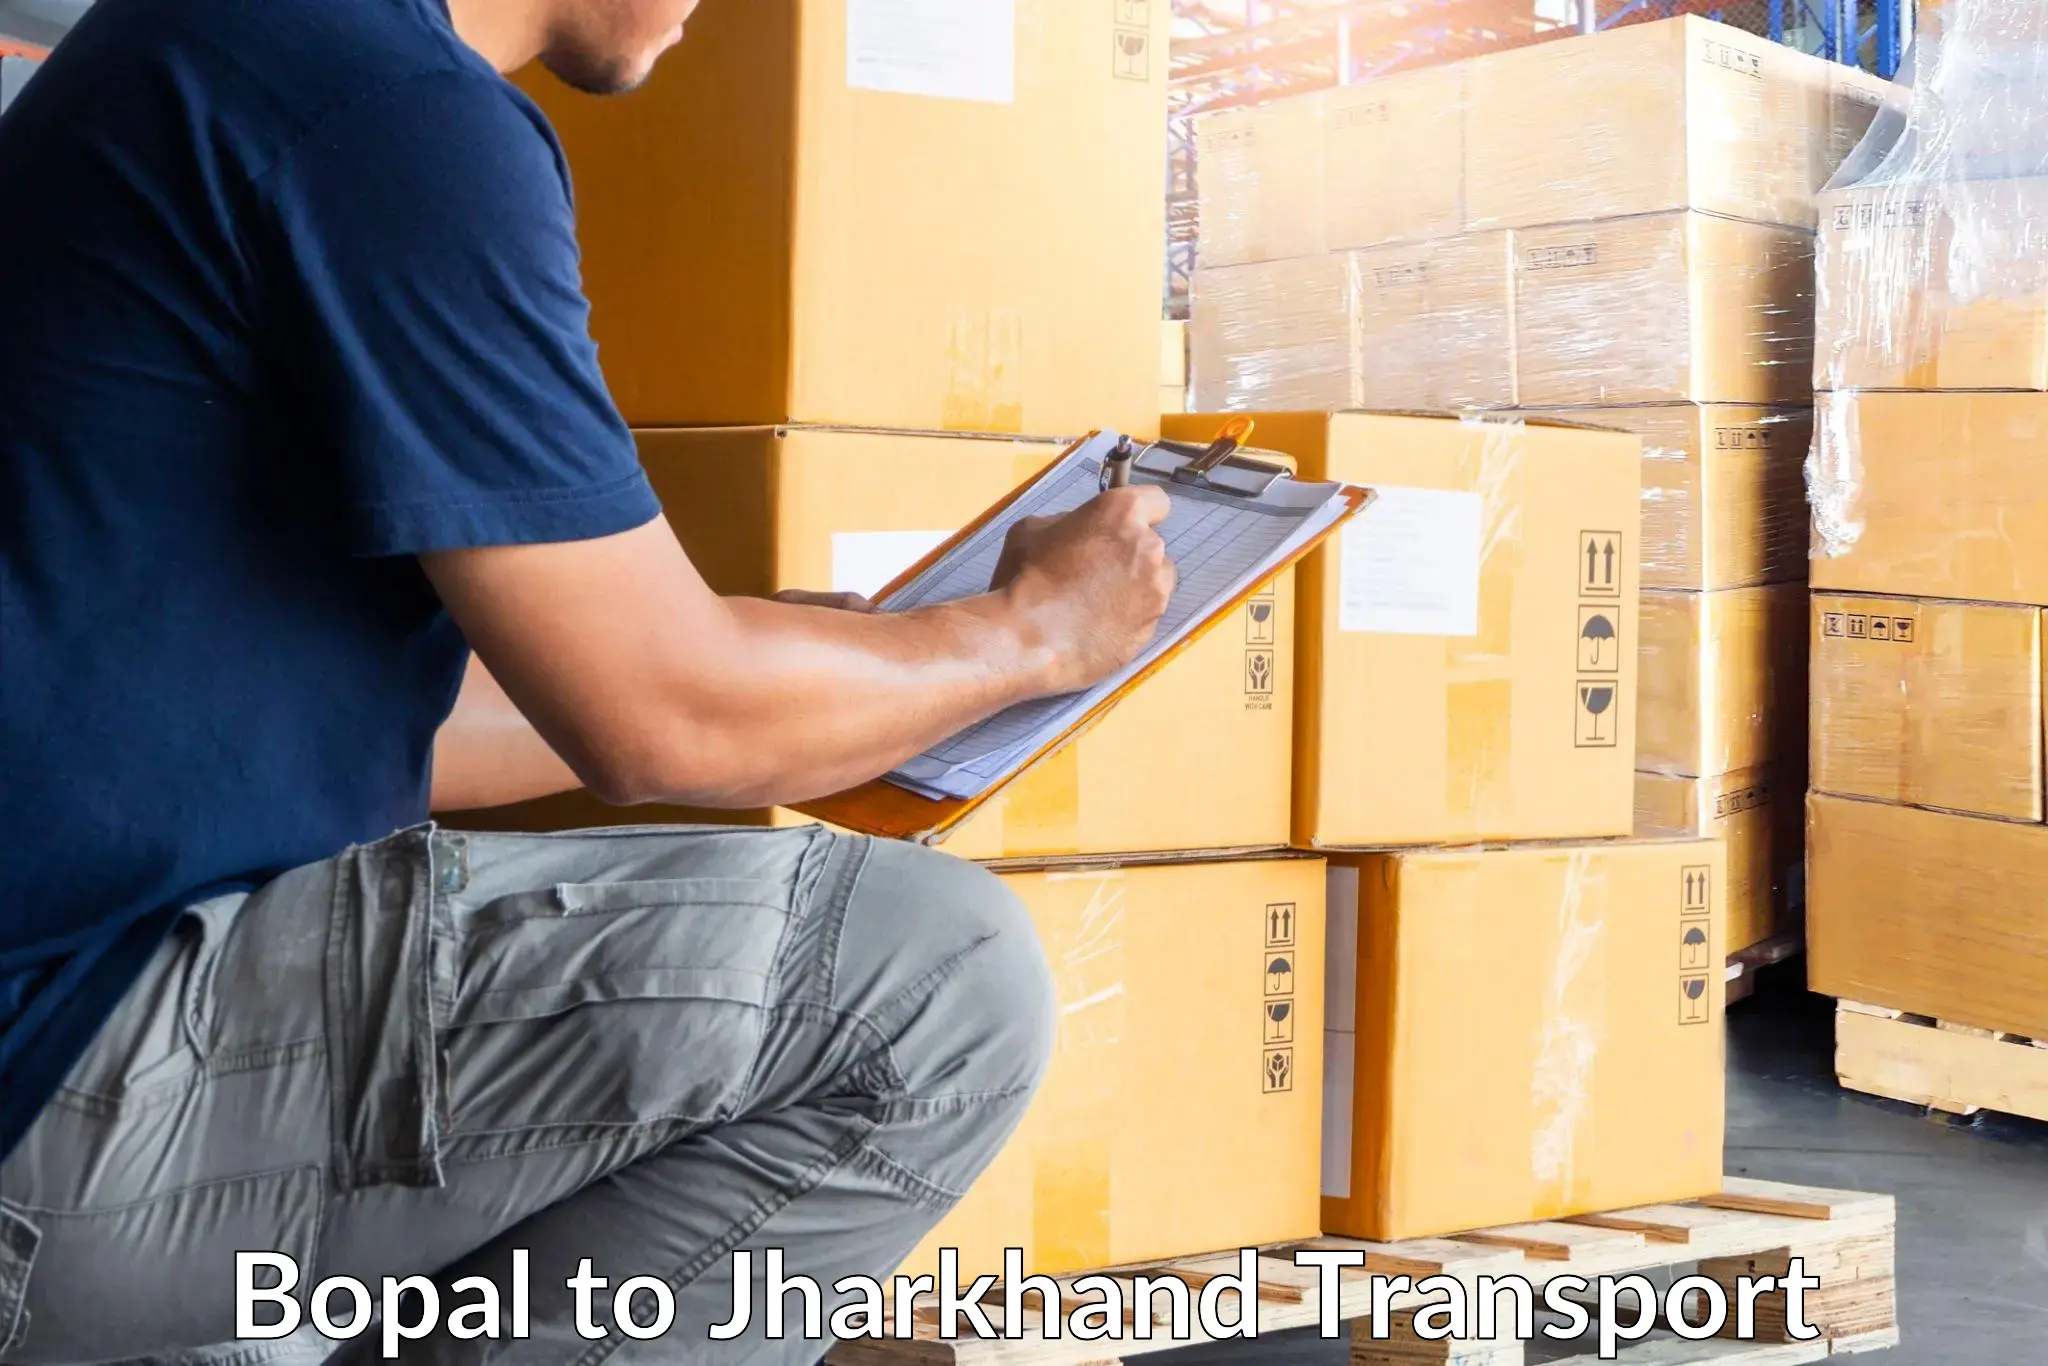 Truck transport companies in India Bopal to Jharkhand